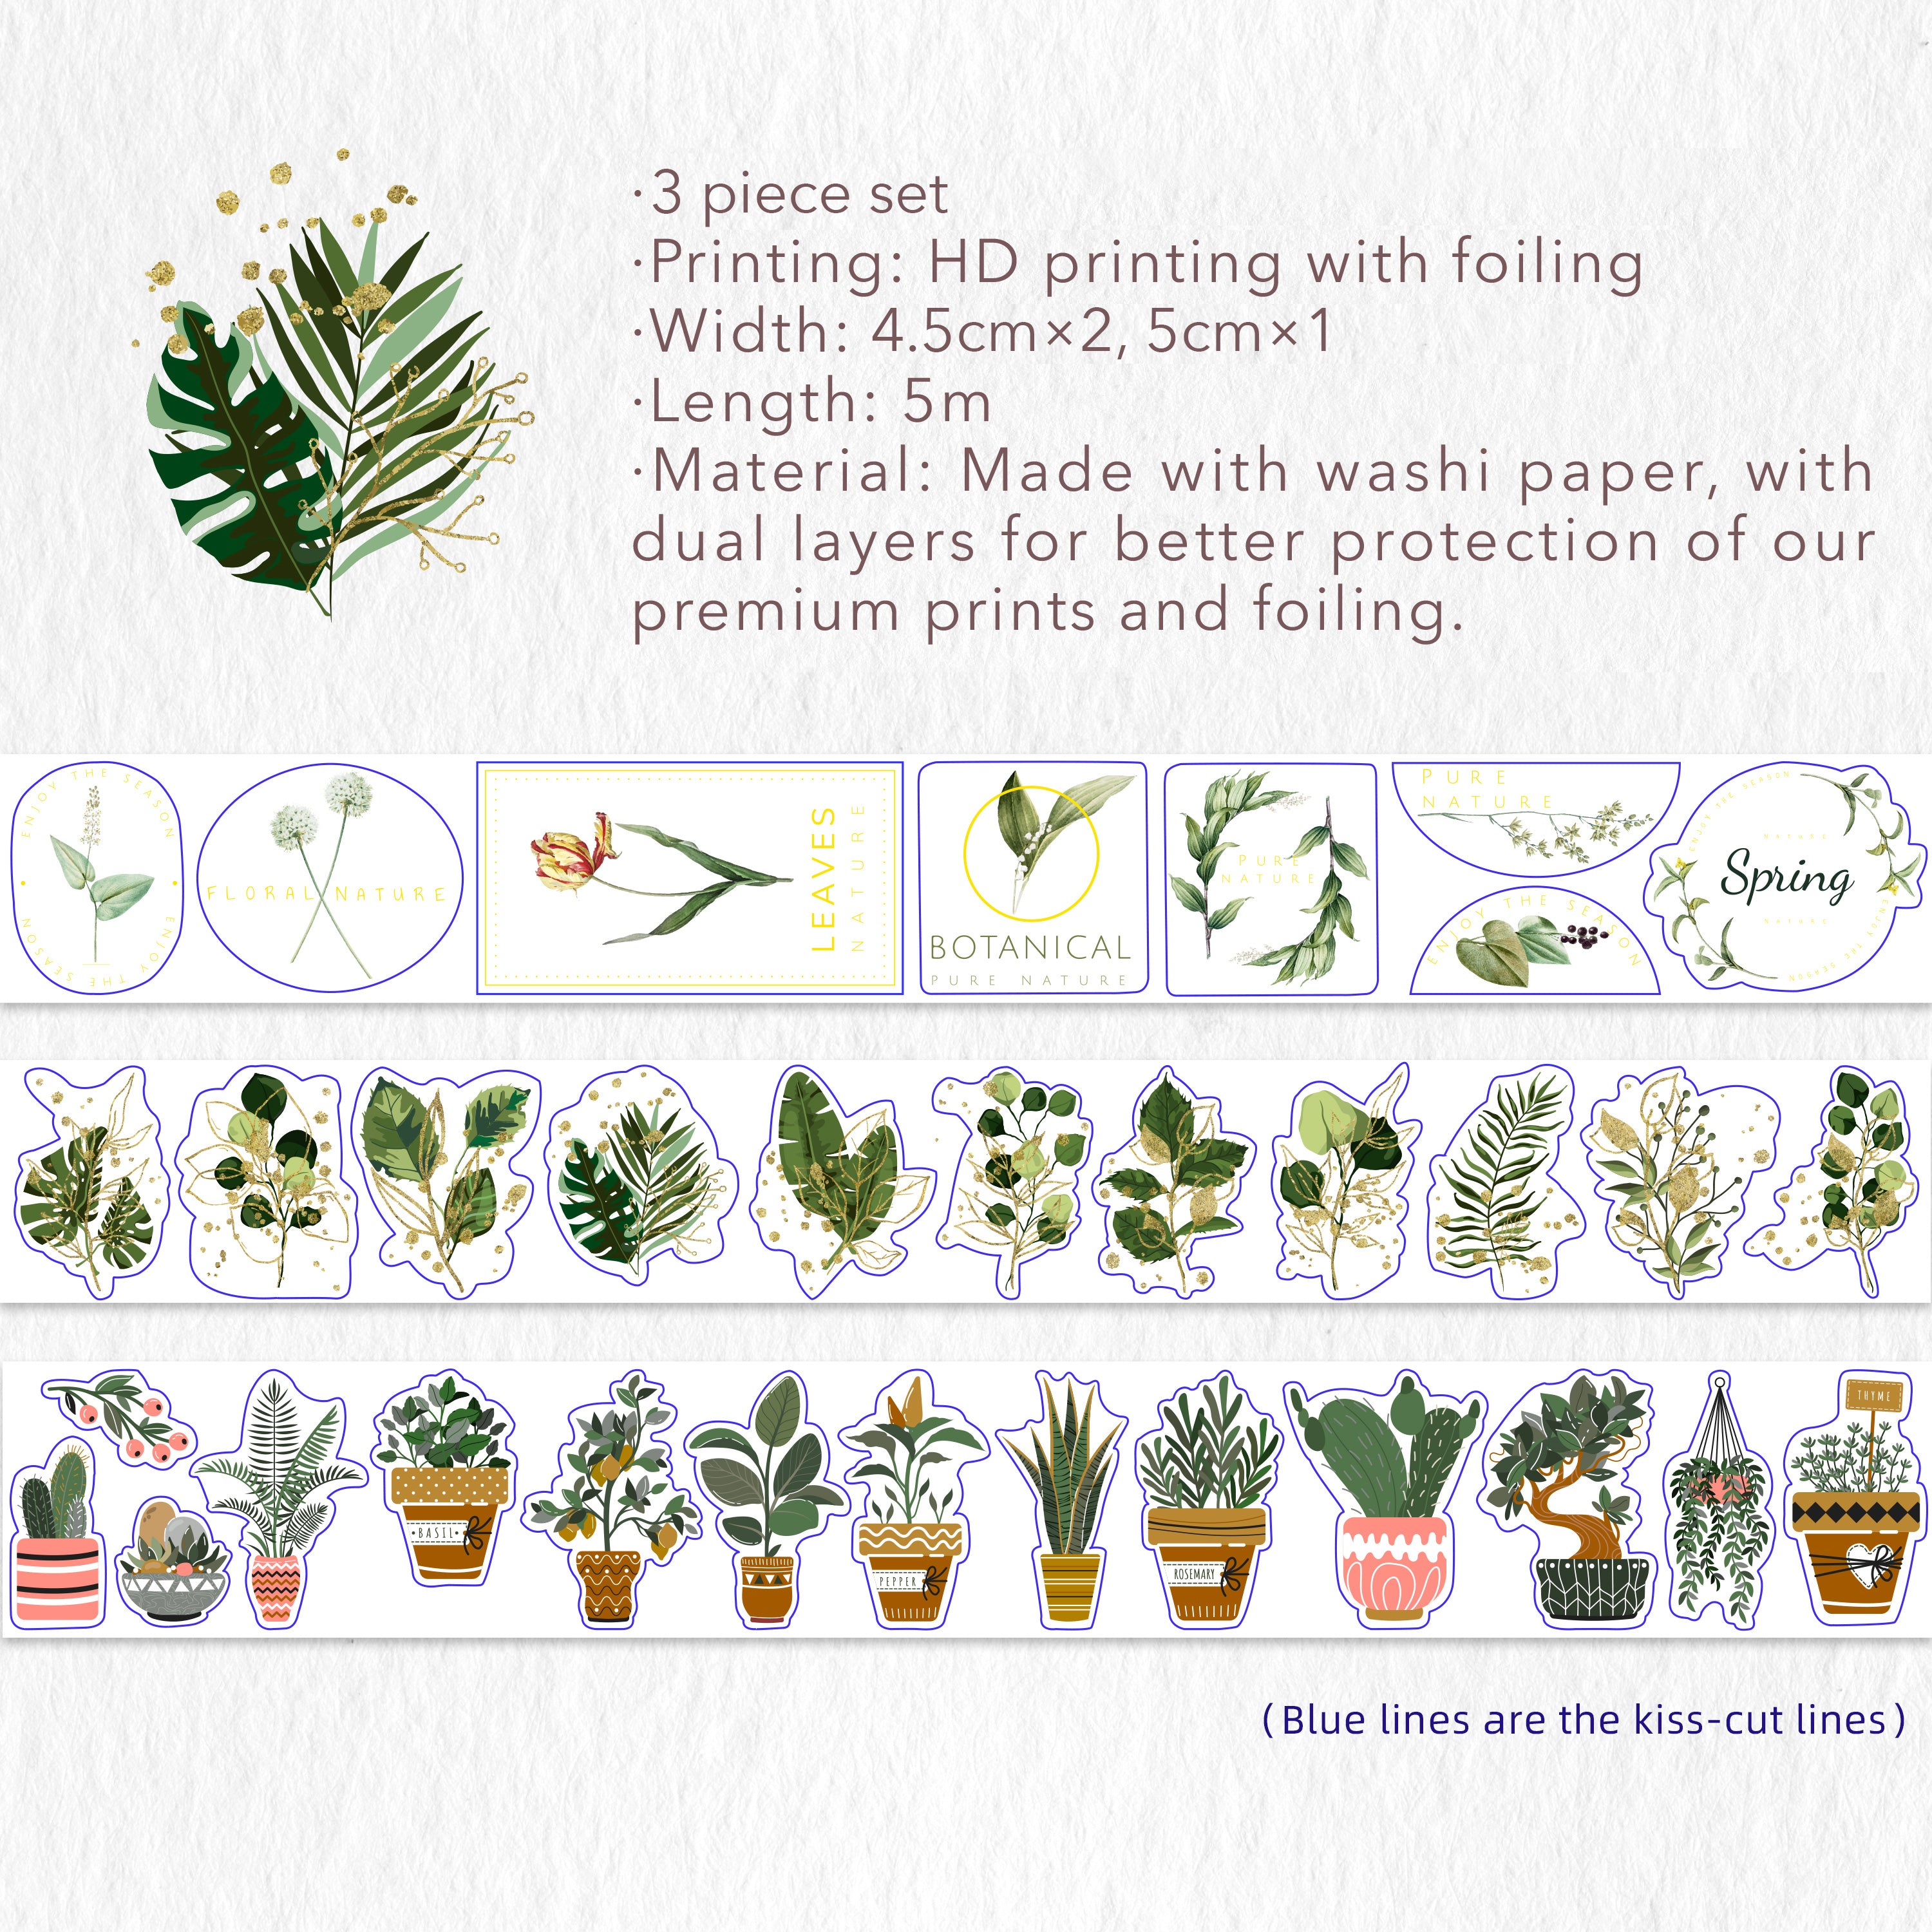 Green Washi Tape Look Set Of Green Art Board Print for Sale by